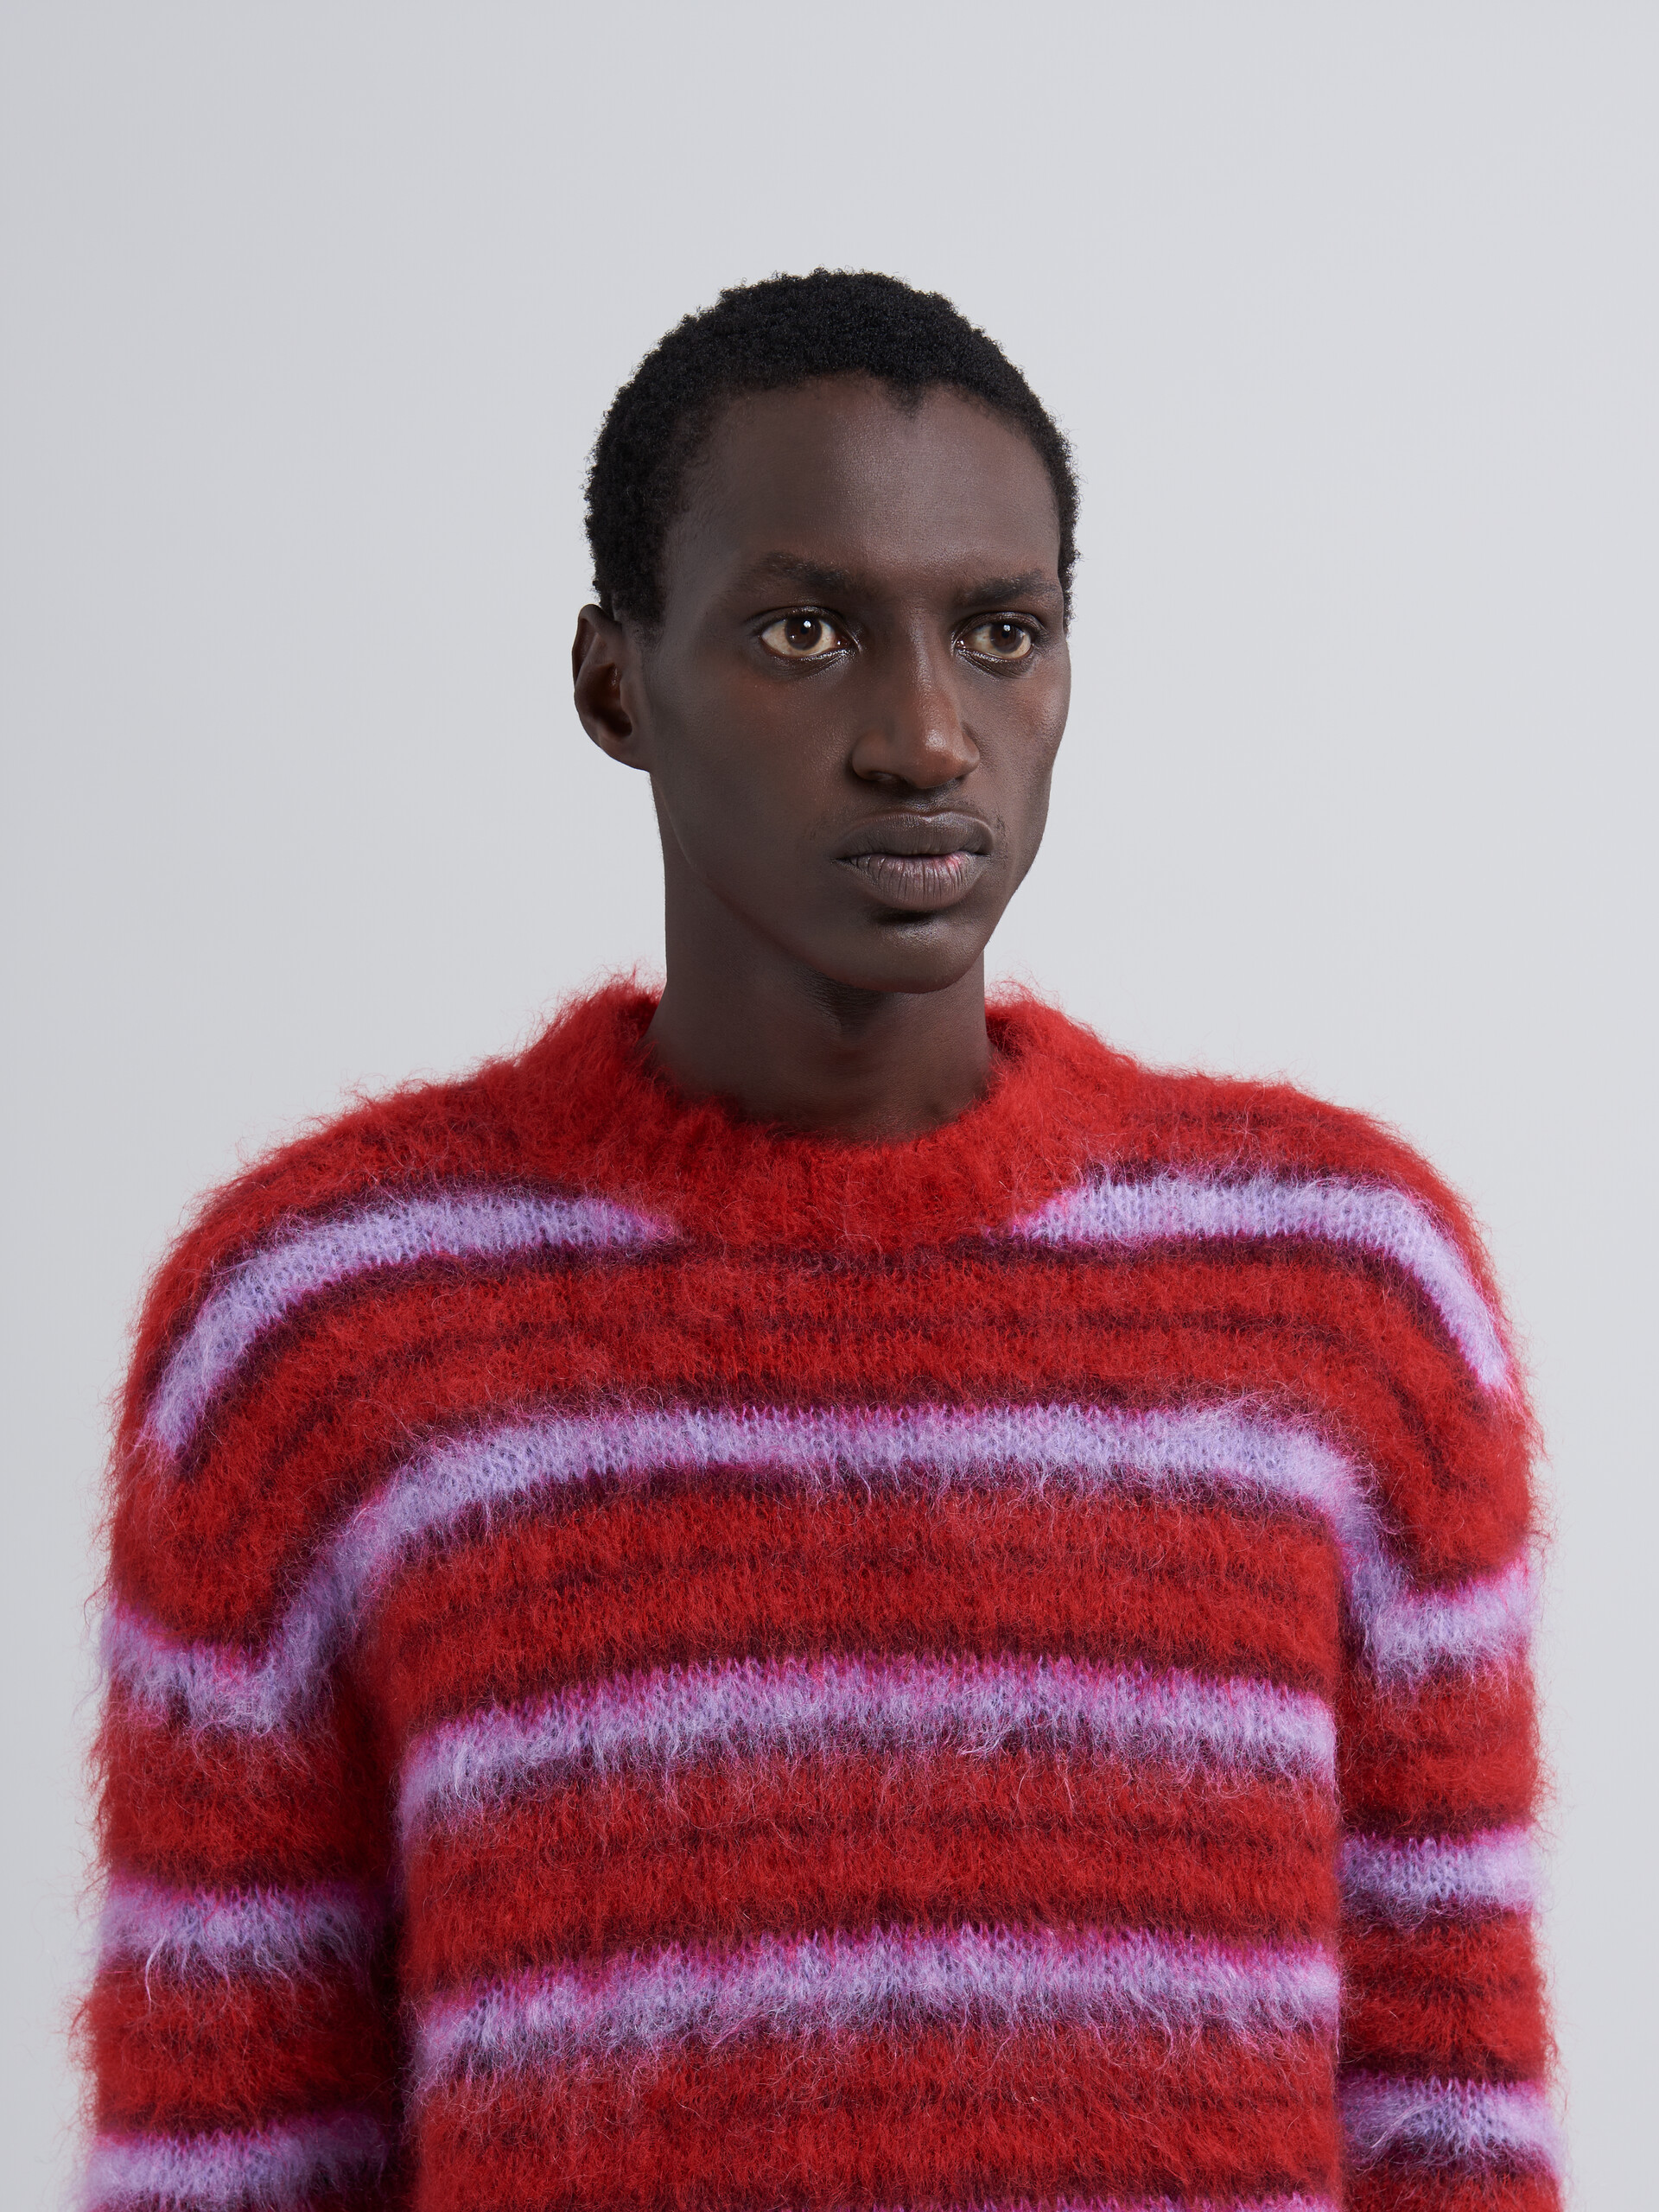 Striped brushed mohair sweater - Pullovers - Image 4